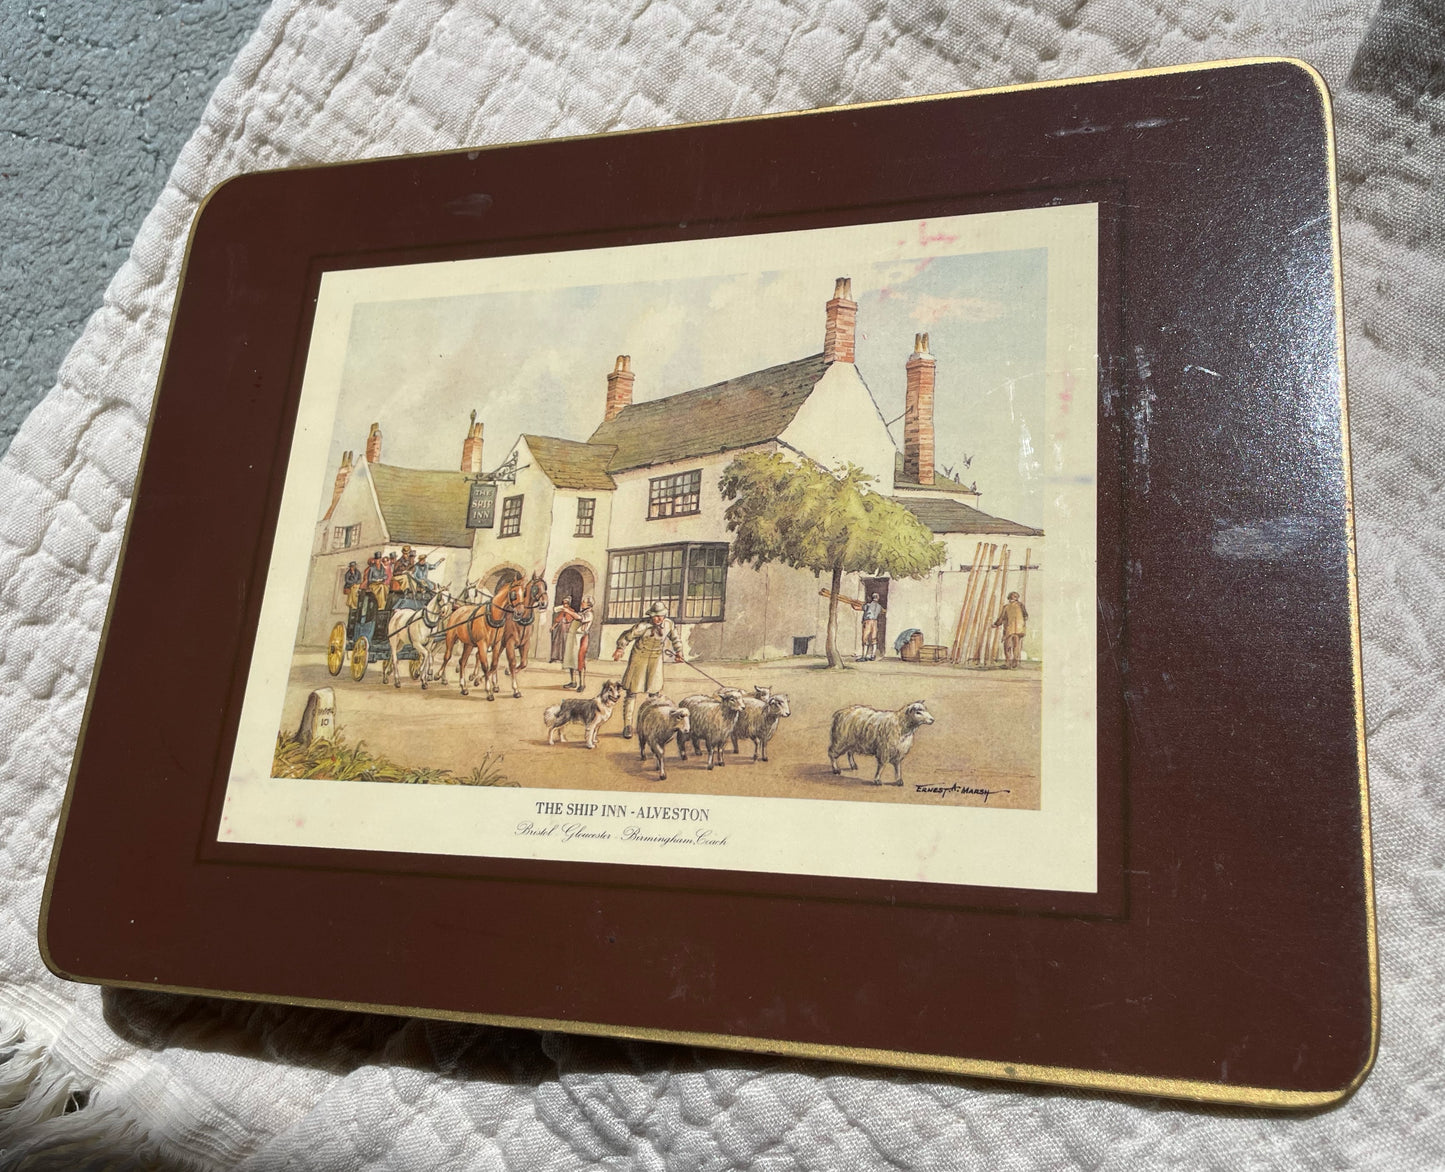 Set of Placemats - 3 Inns in England